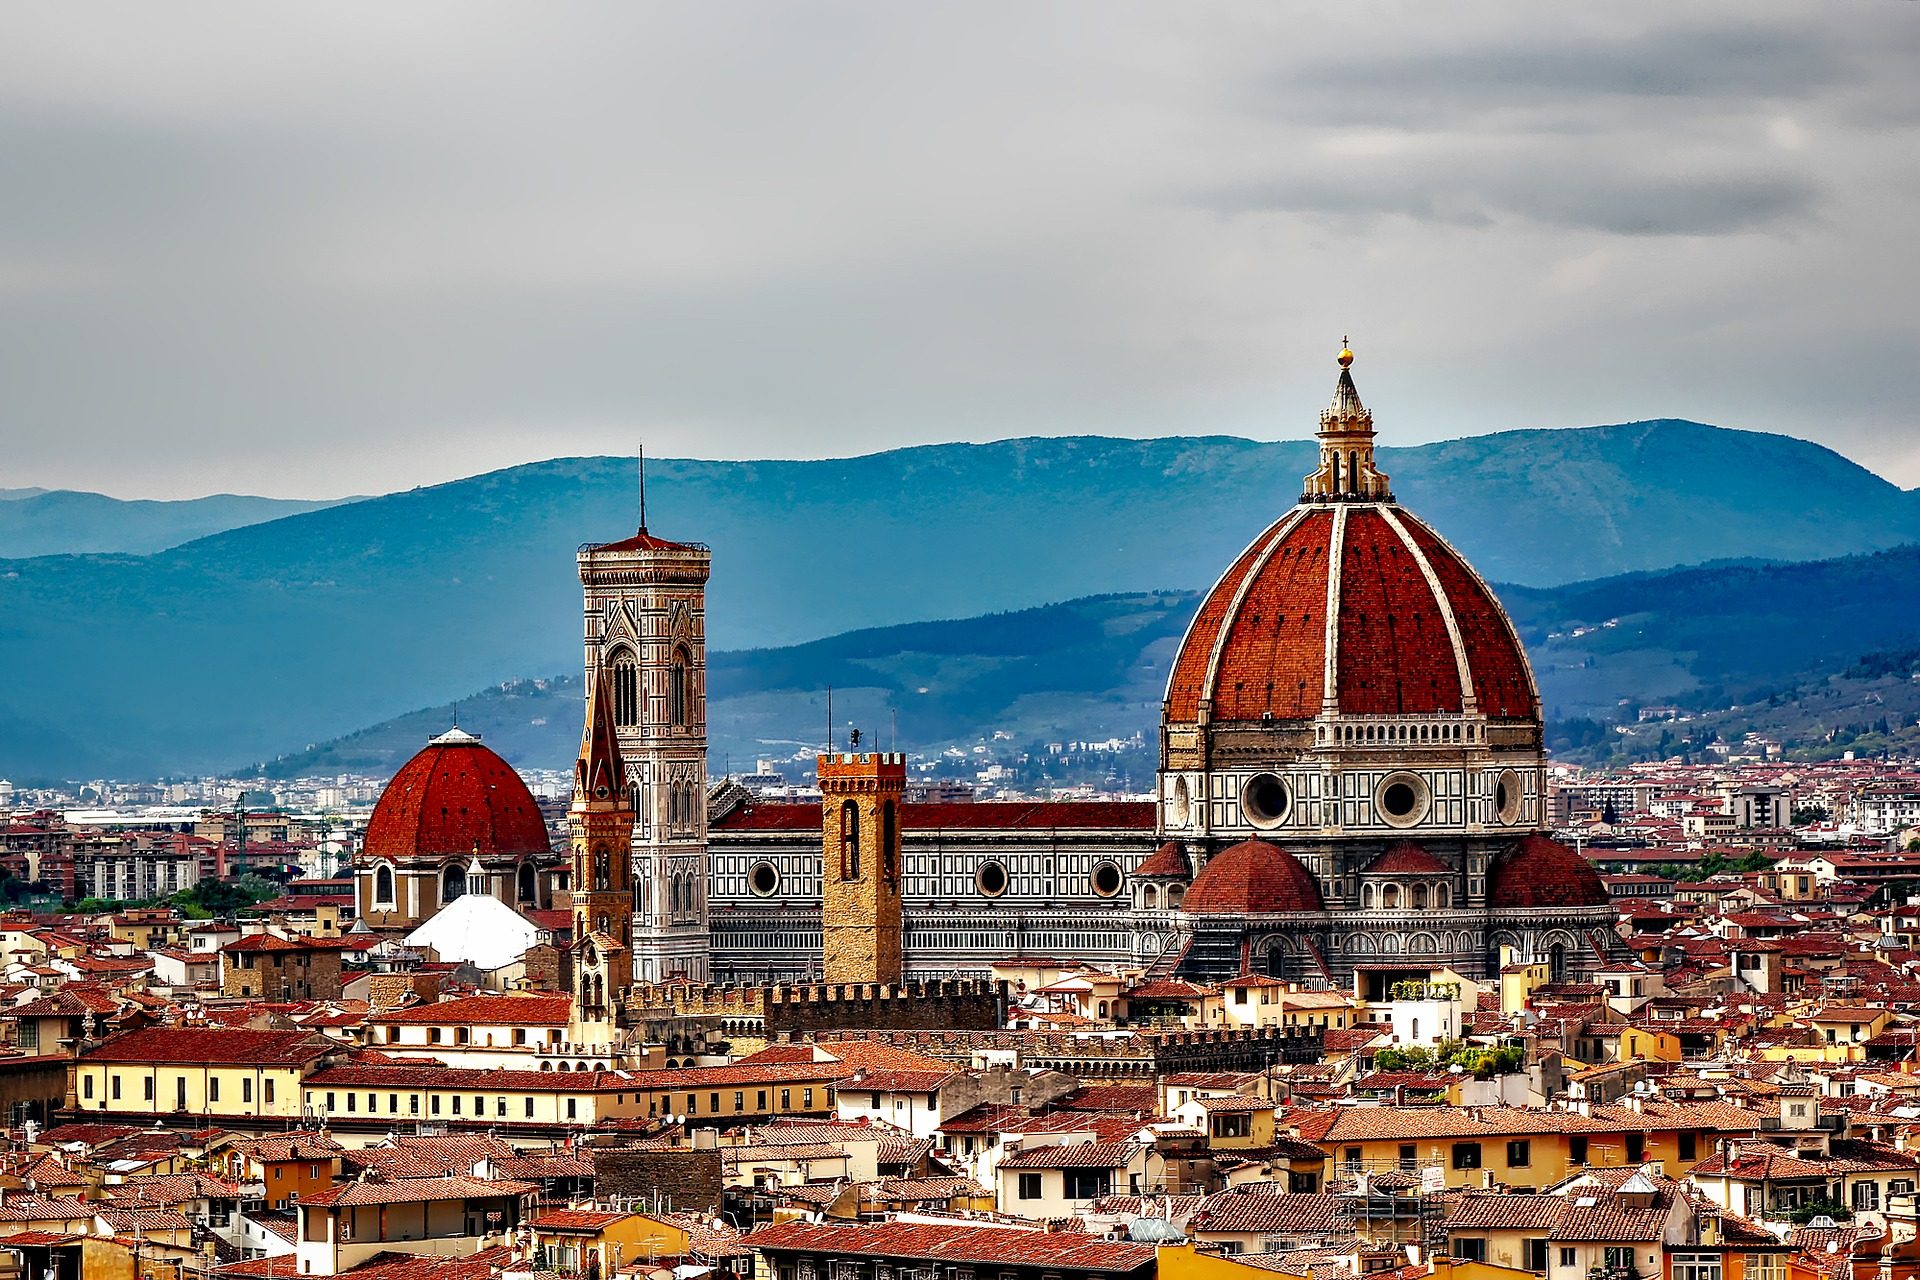 Where to Stay if You’ve Never Been to Florence